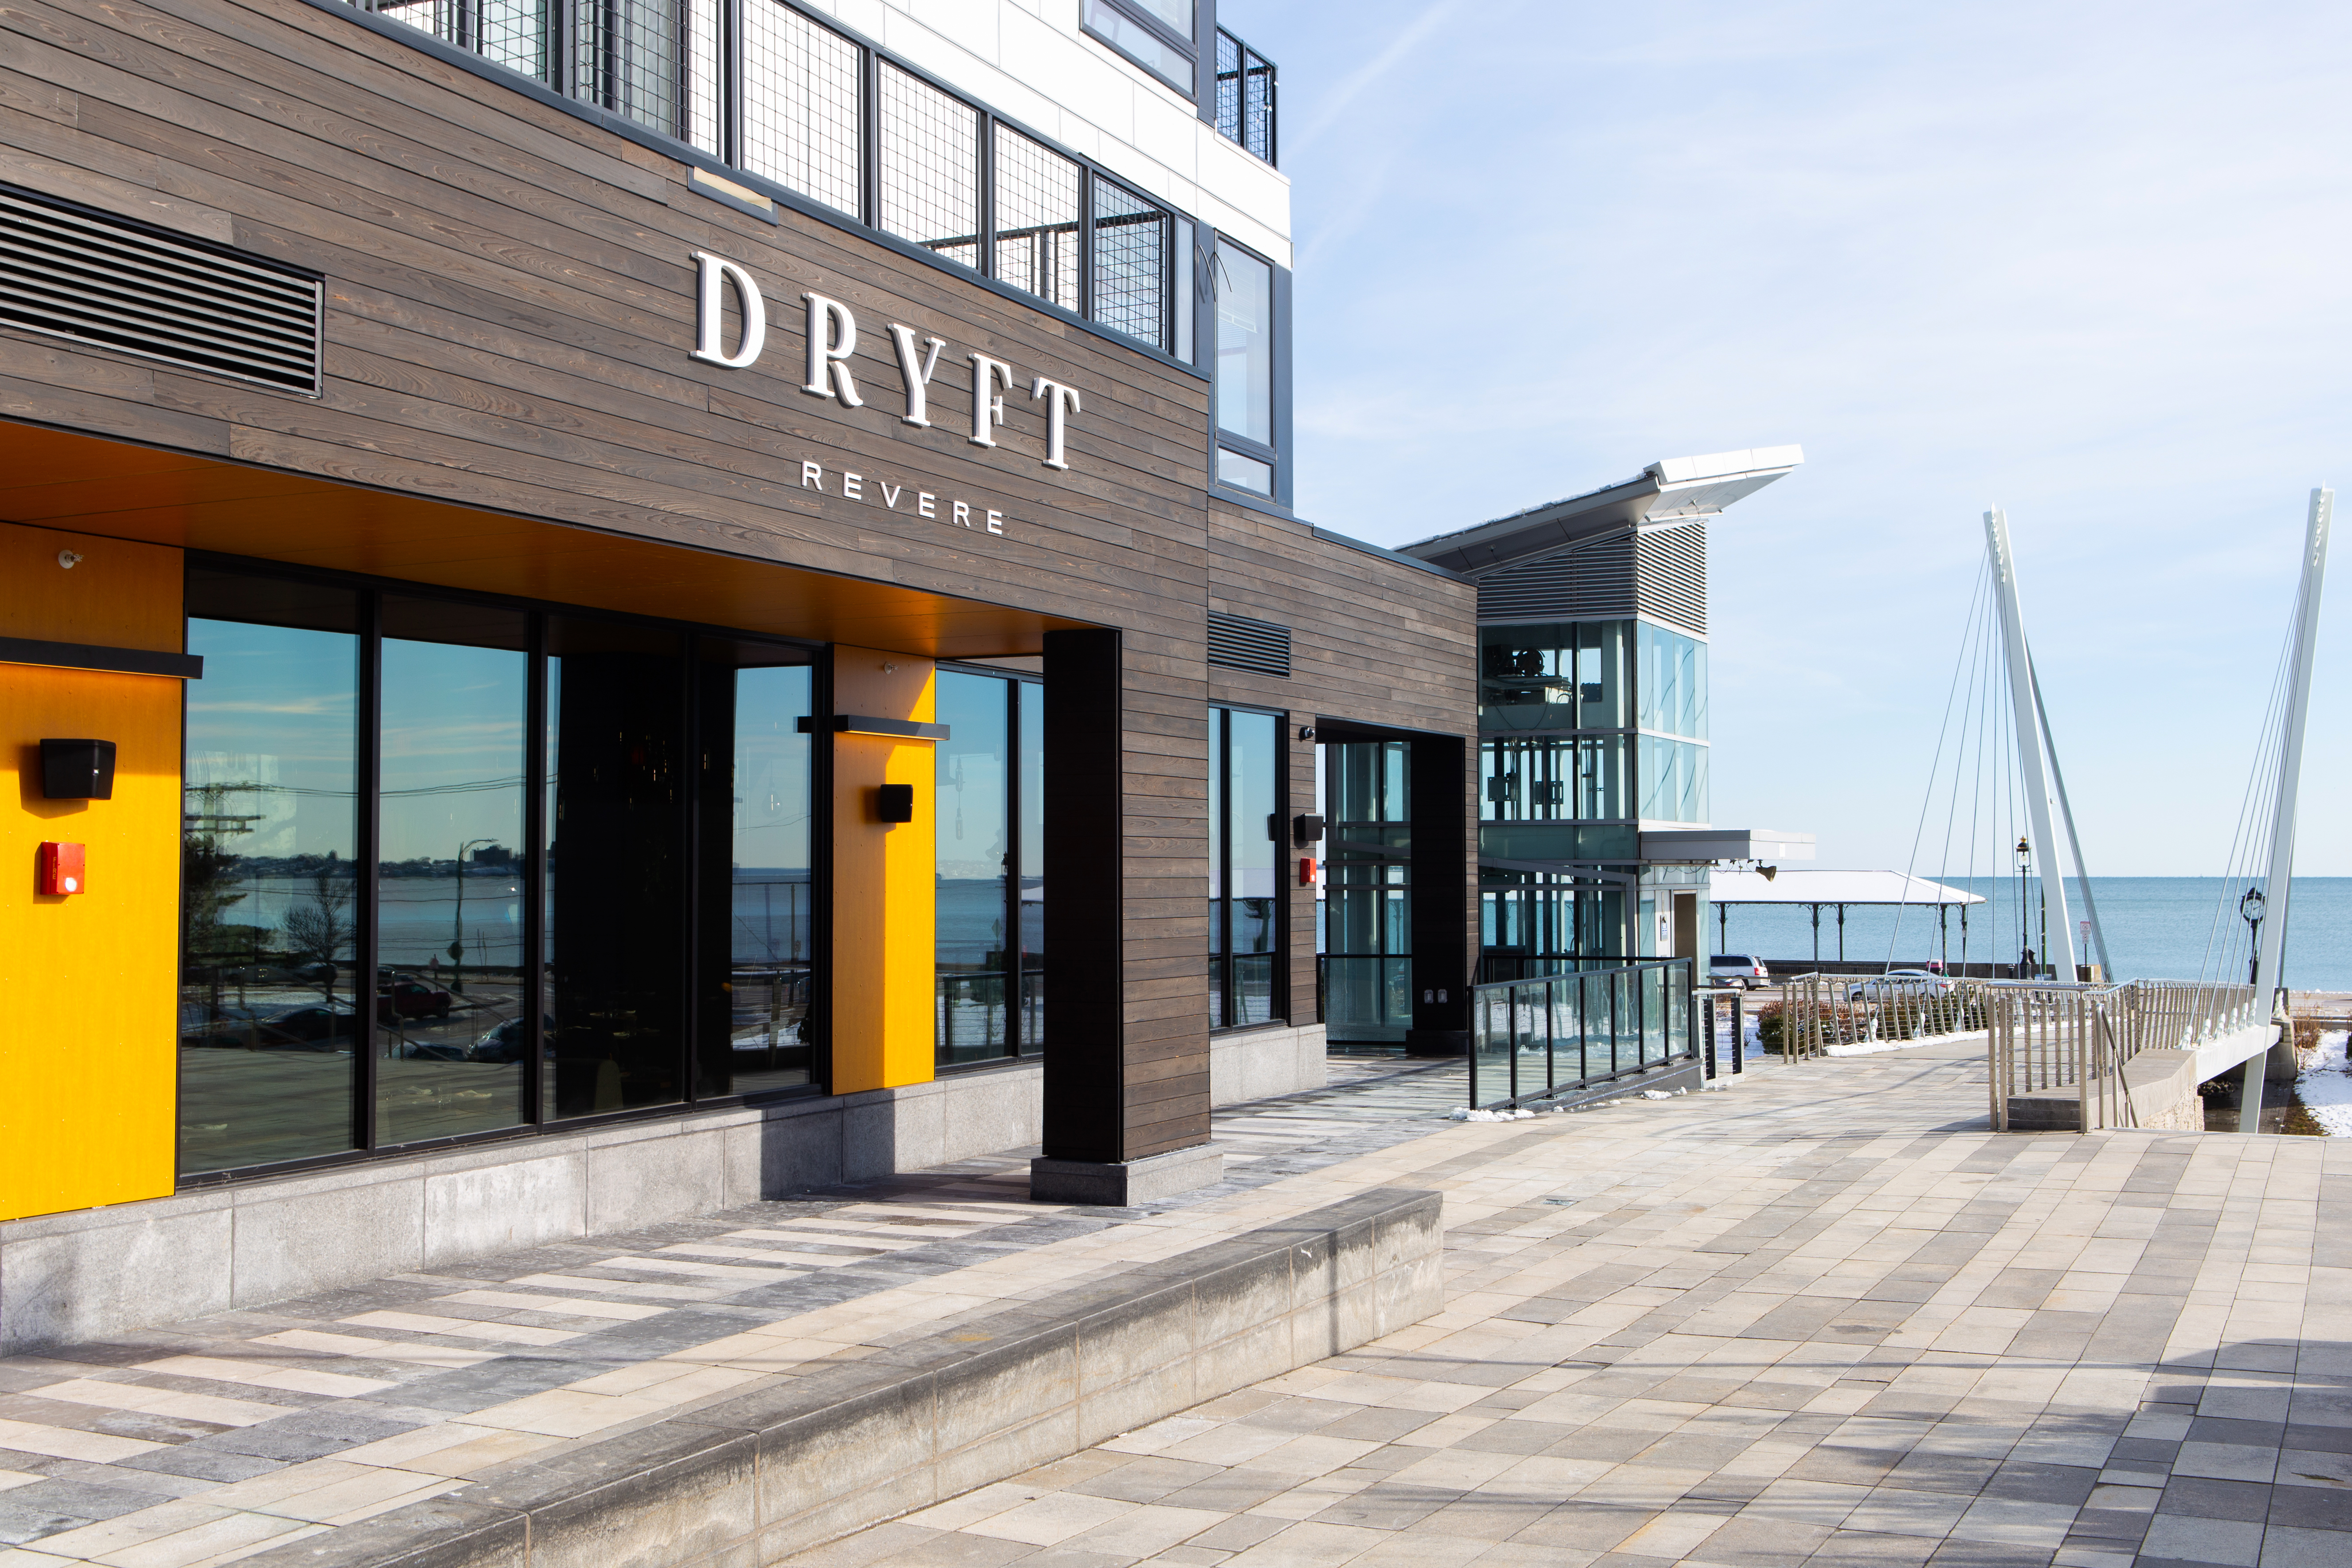 Dryft's patio and ocean view in Revere.